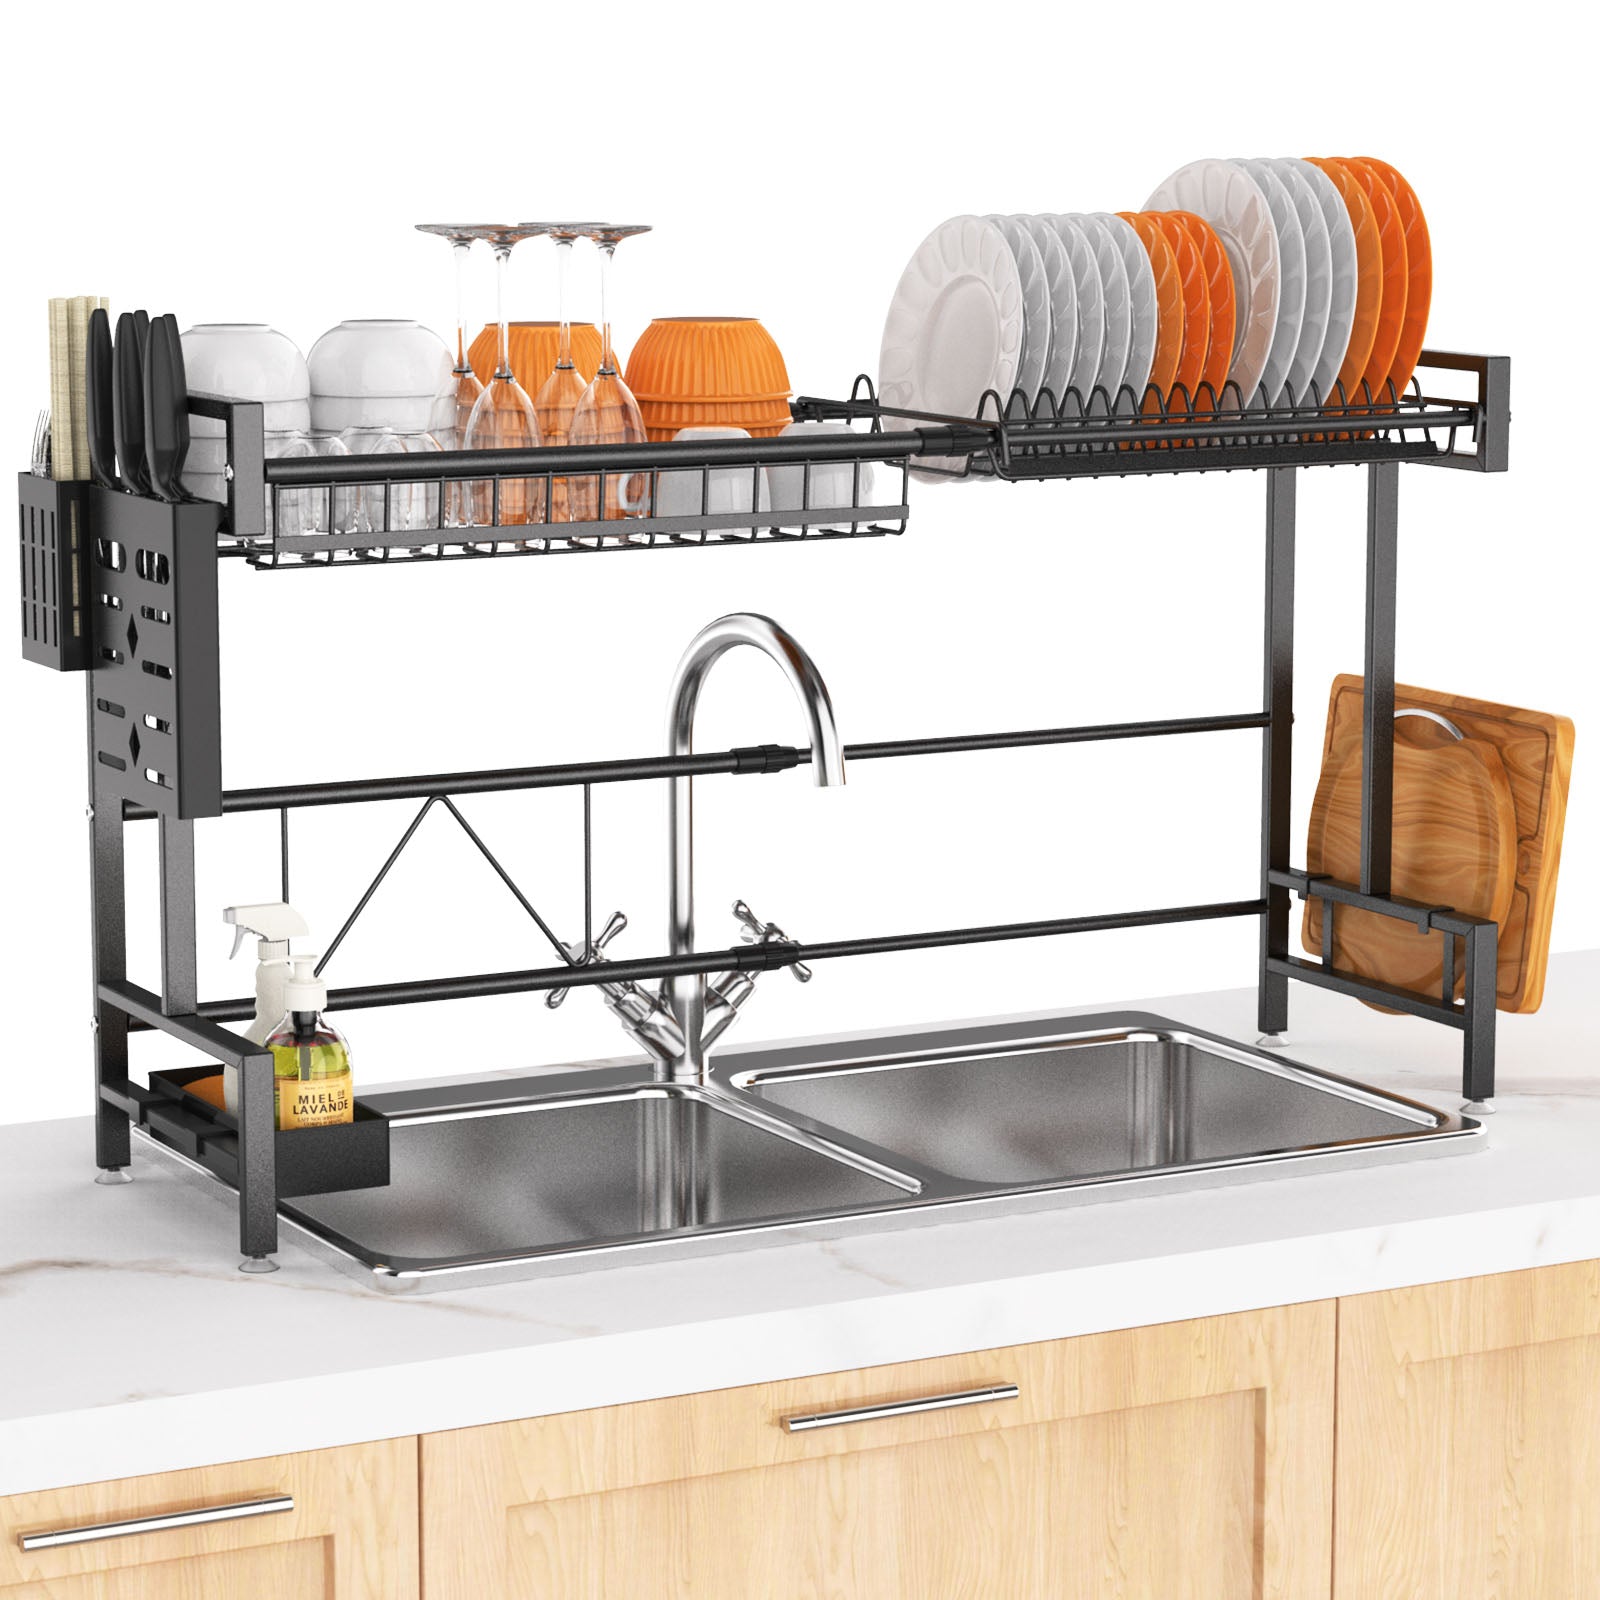 Dish Drying Rack, Stainless Steel Dish Racks For Kitchen Counter